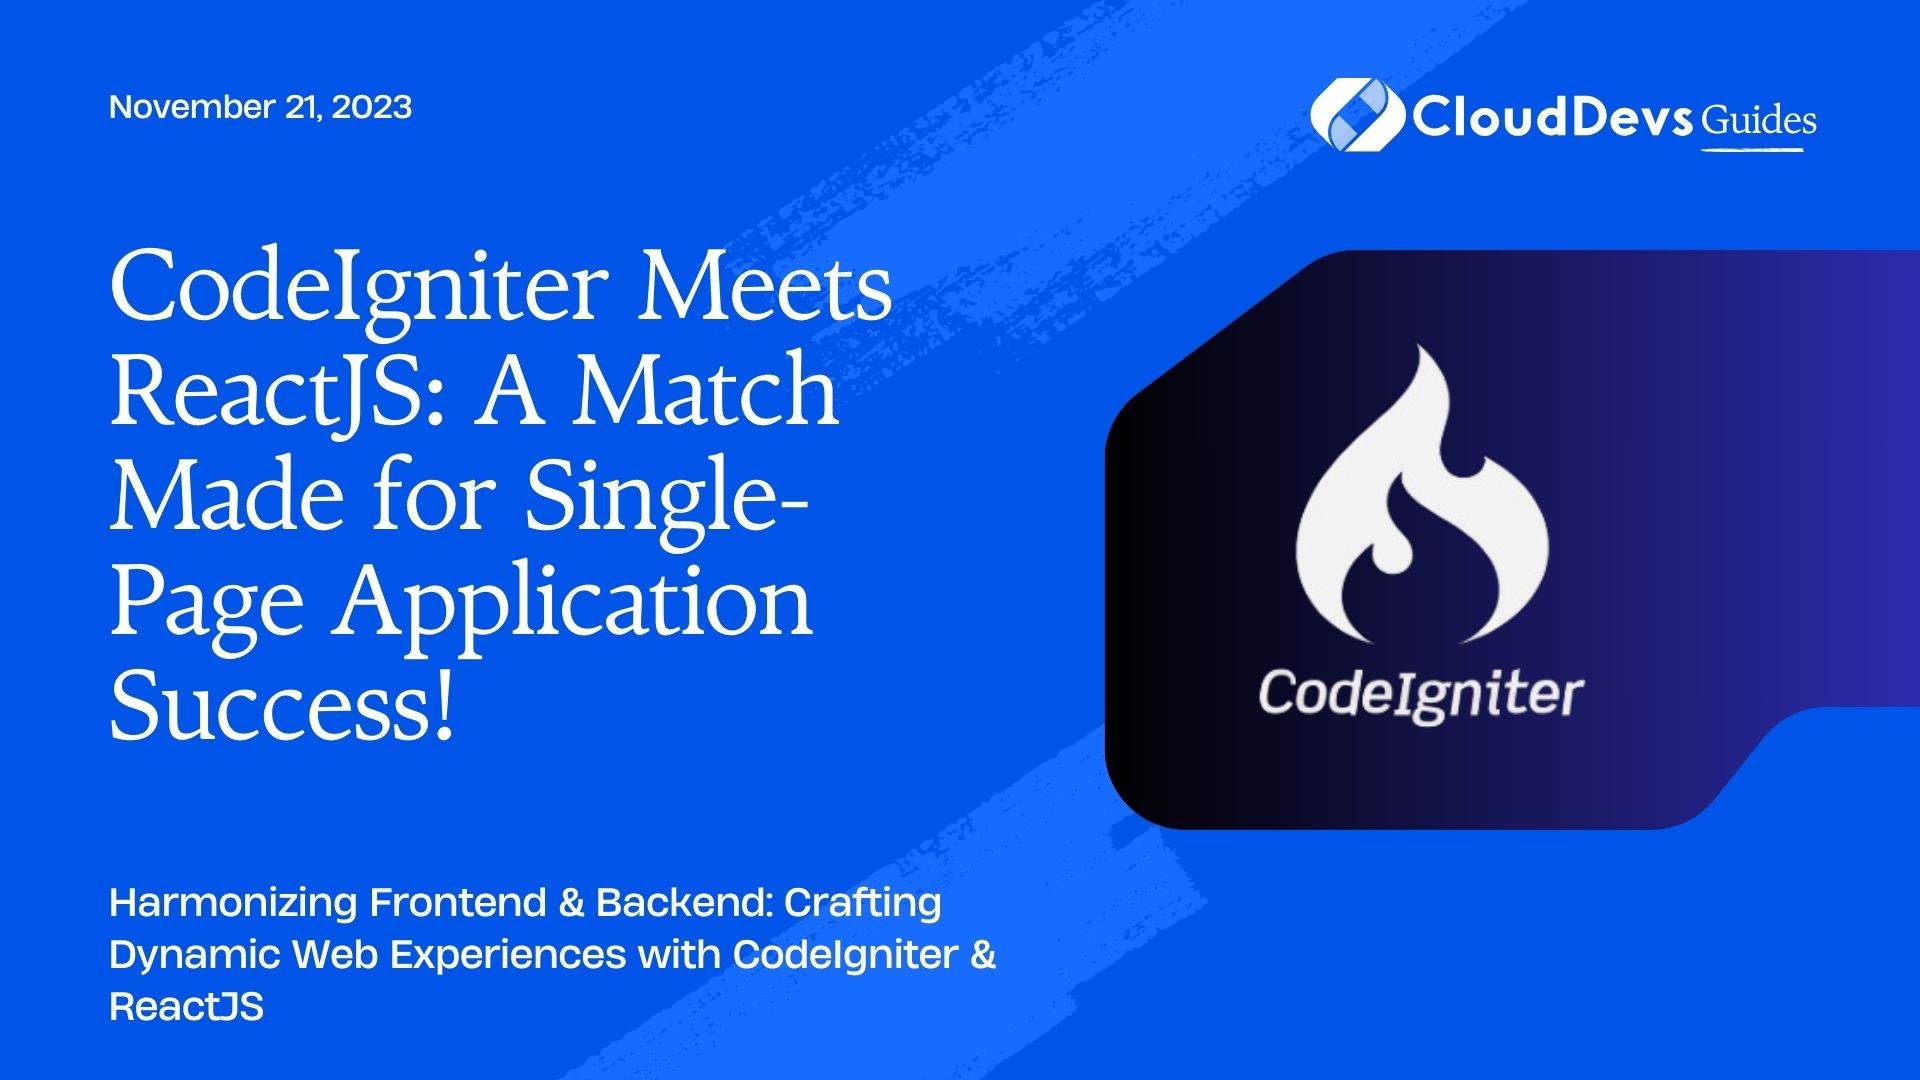 CodeIgniter Meets ReactJS: A Match Made for Single-Page Application Success!